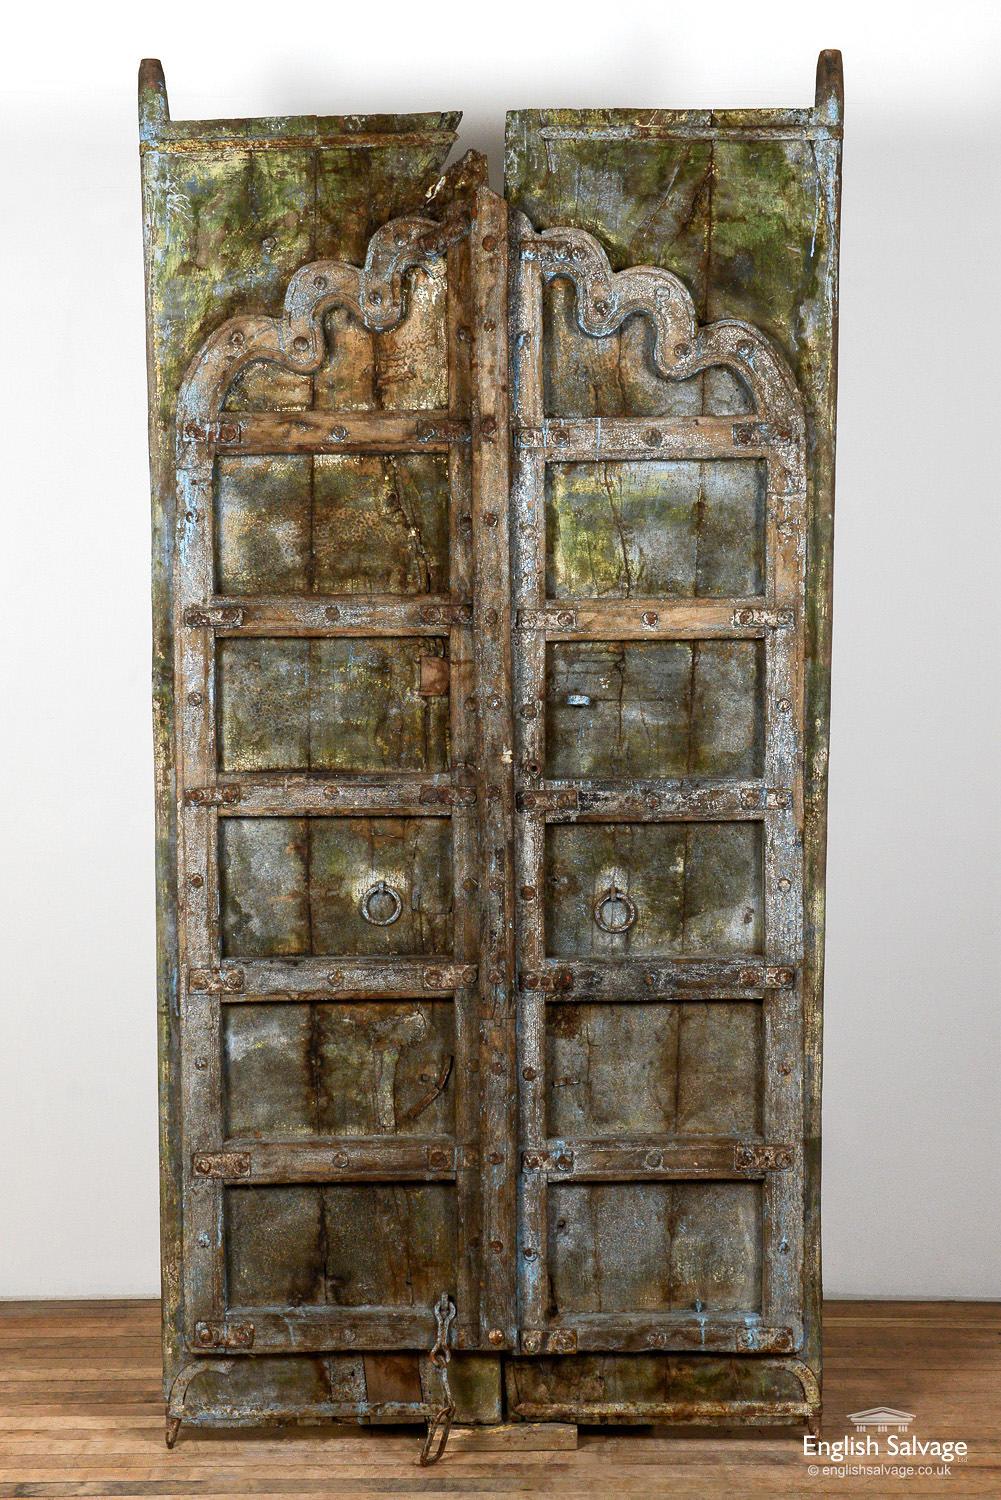 Antique Indian hardwood door dating from early C19th. An overlay giving each door the appearance of having six panels has been attached, with the top section/panel having an unusual 